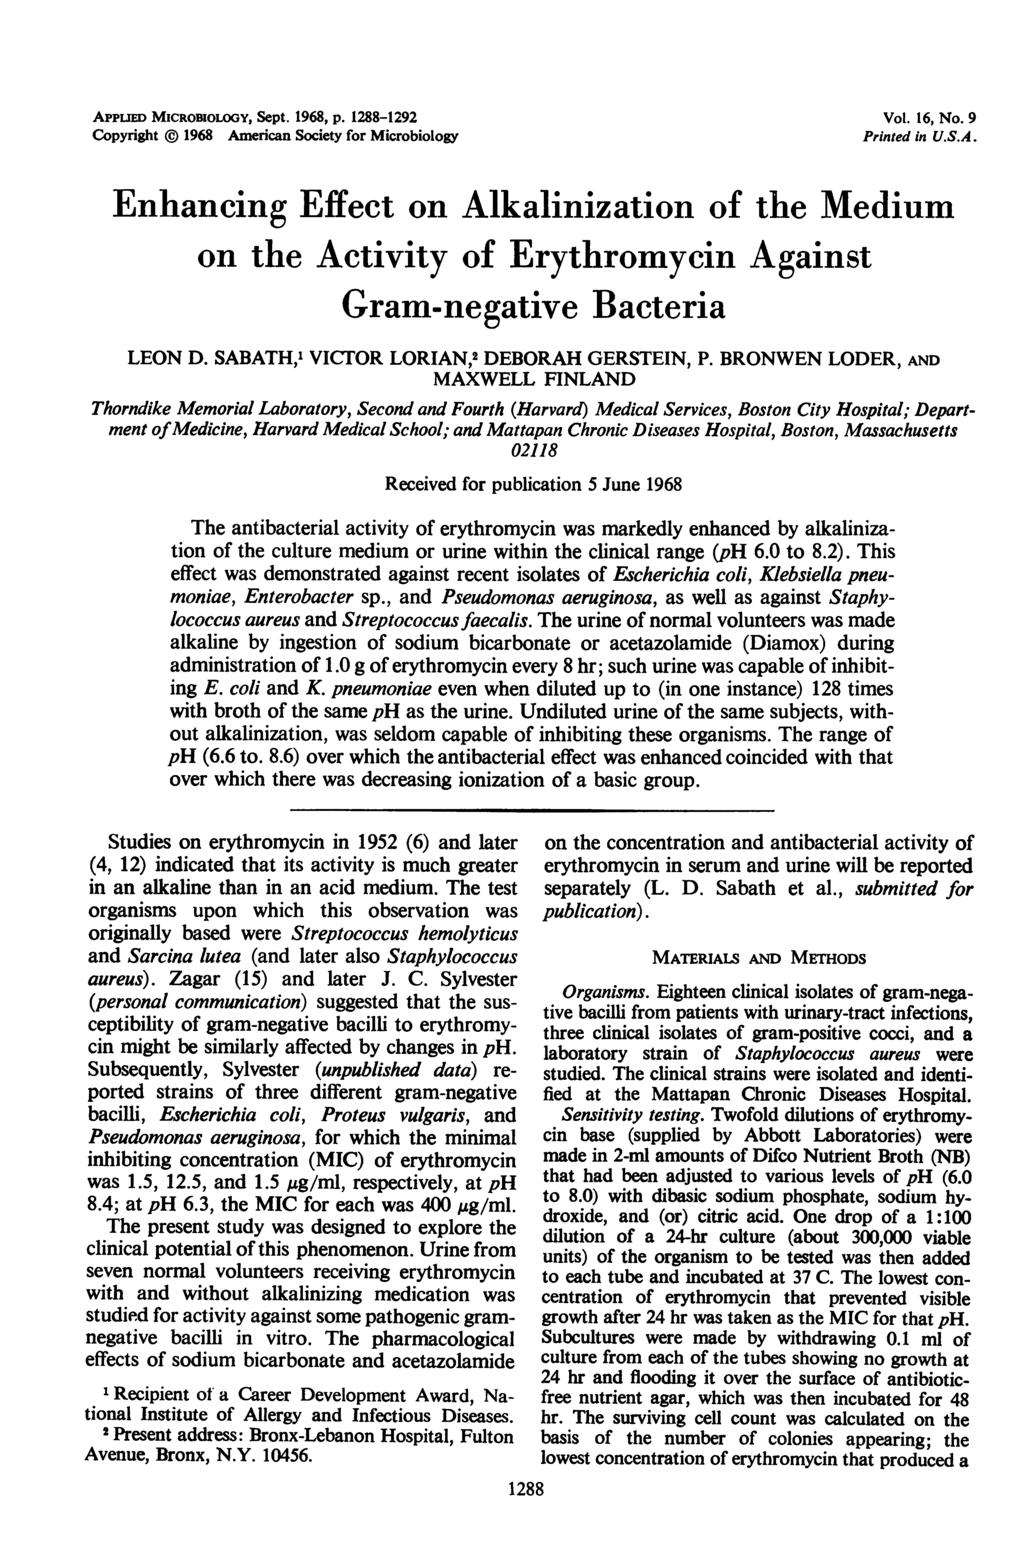 Appum MICROBIOLOGY, Sept. 968, p. 88-9 Copyright @ 968 American Society for Microbiology Vol. 6, No. 9 Printed in U.S.A. Enhancing Effect on Alkalinization of the Medium on the Activity of Erythromycin Against Gram-negative Bacteria LEON D.